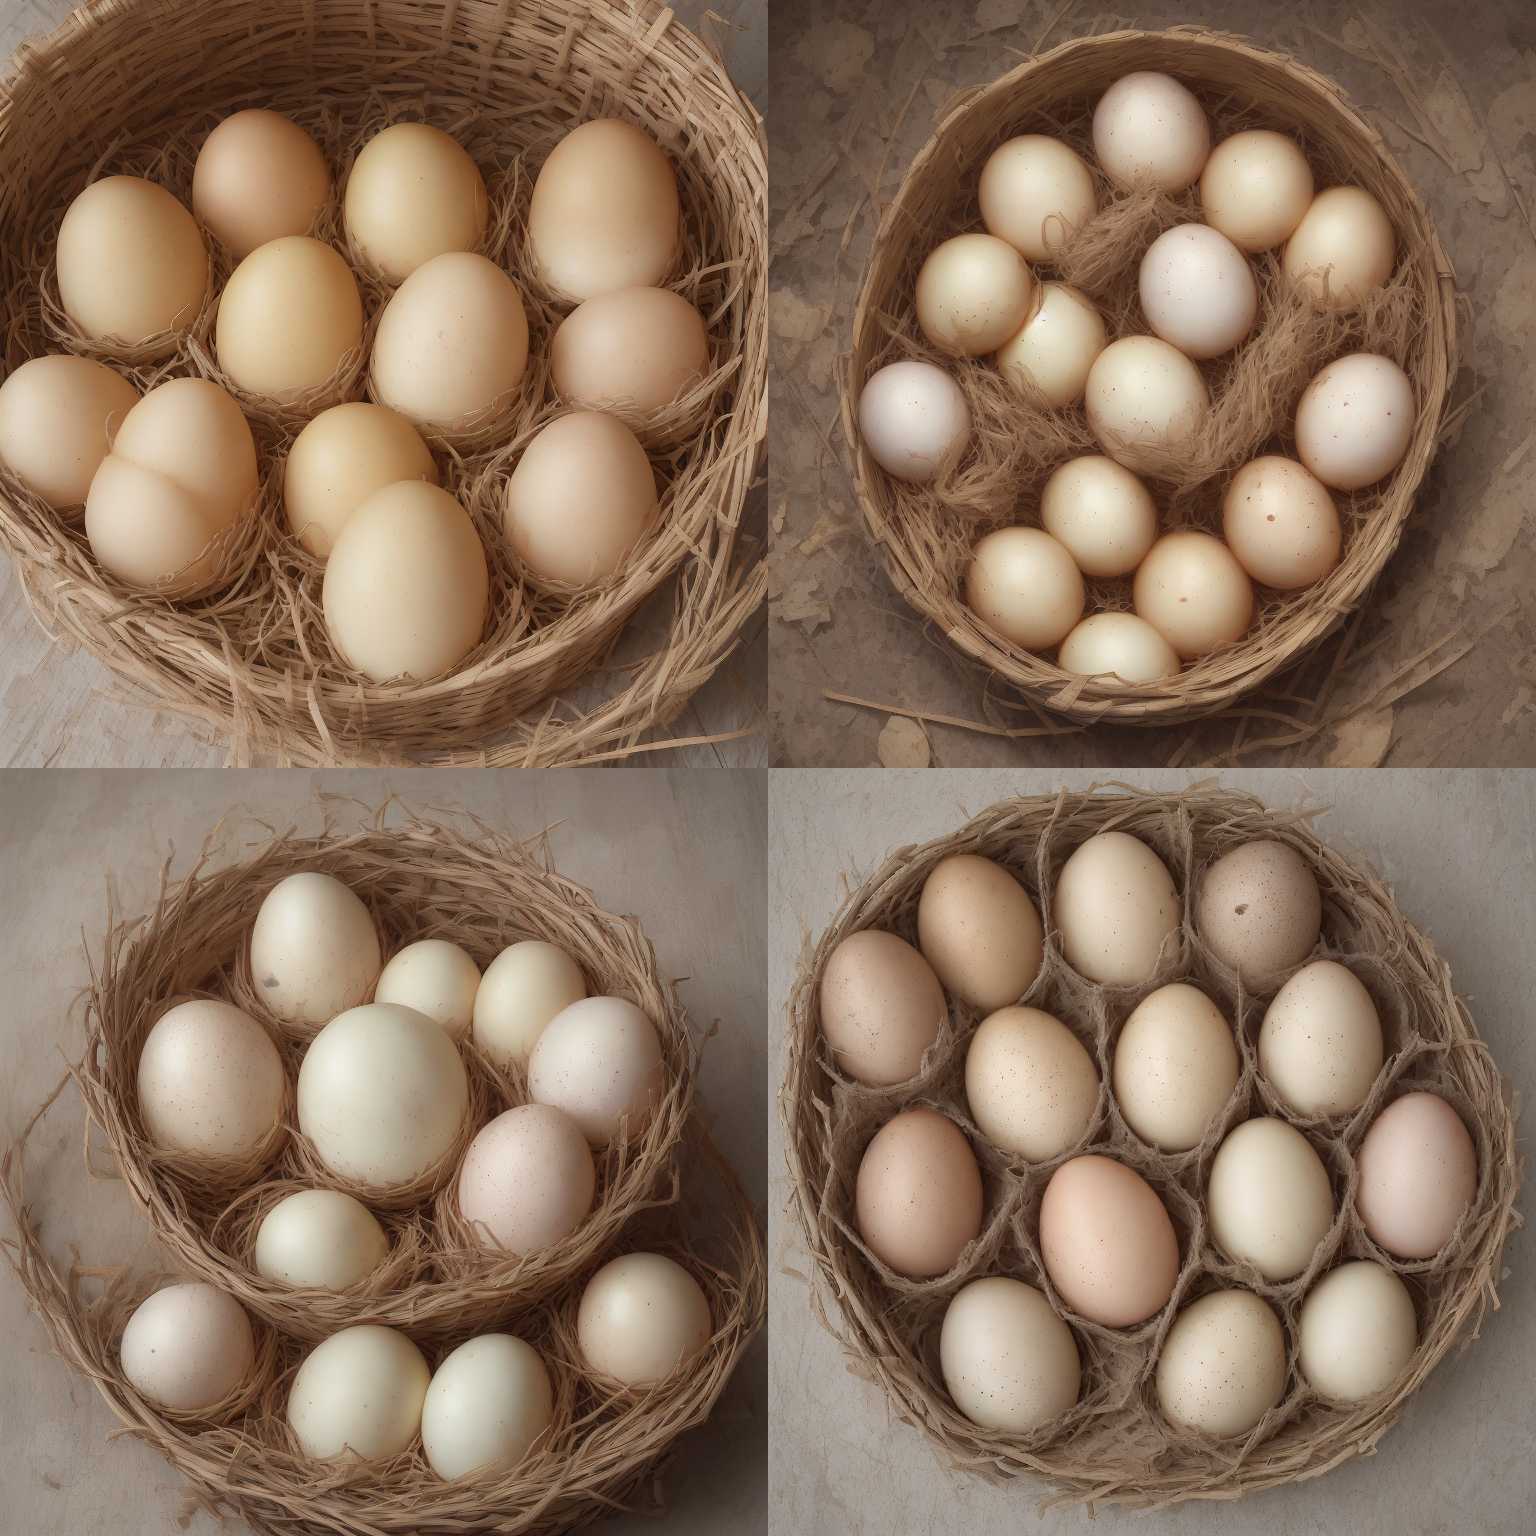 Newly hatched eggs